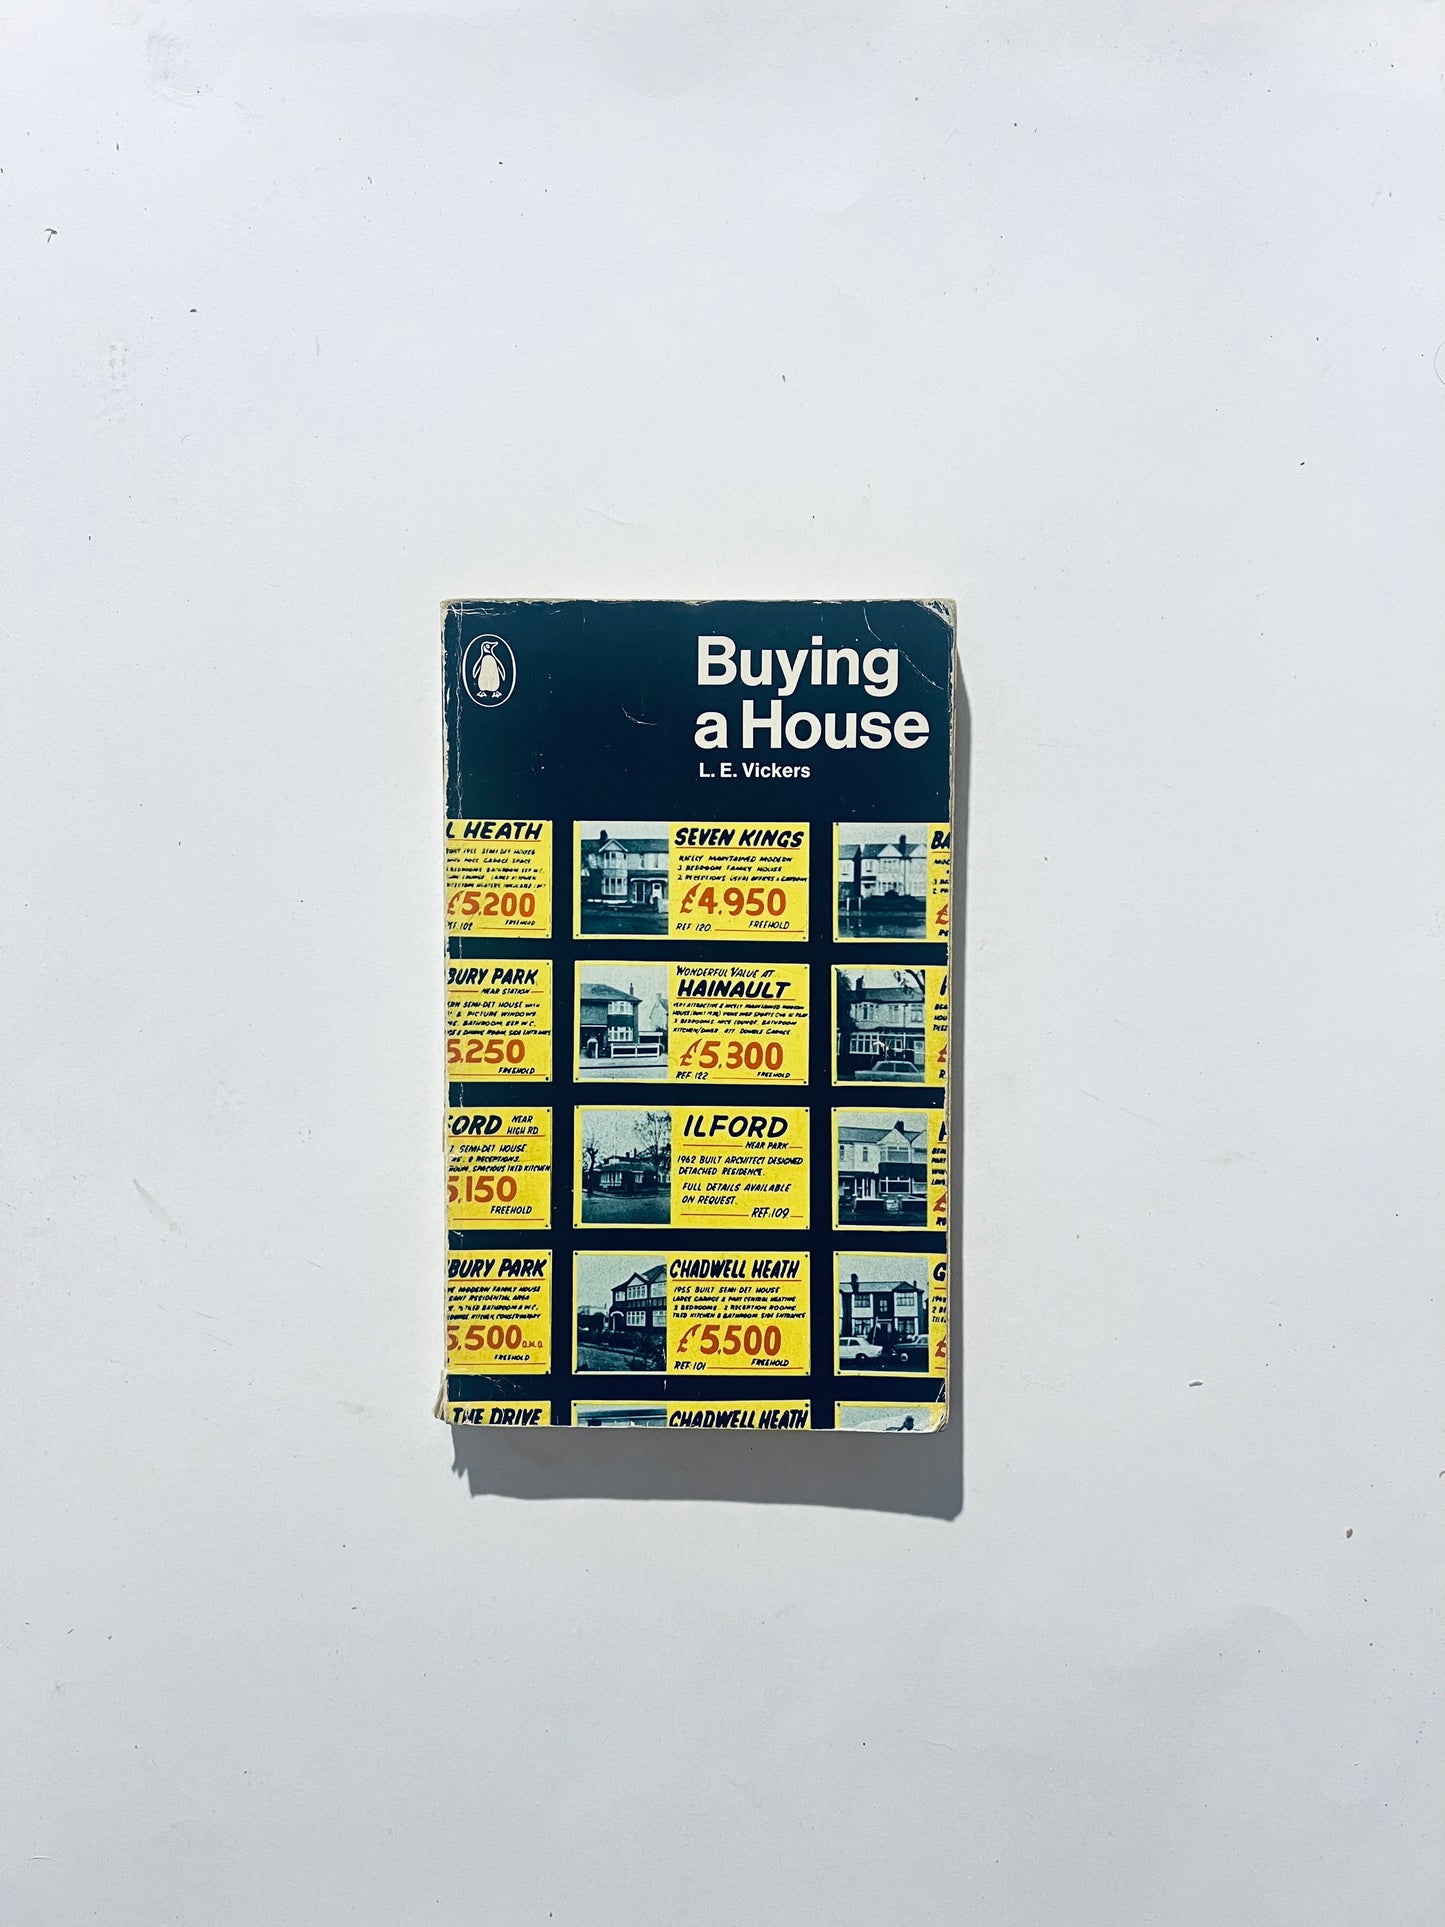 Buying A House-L.E. Vickers